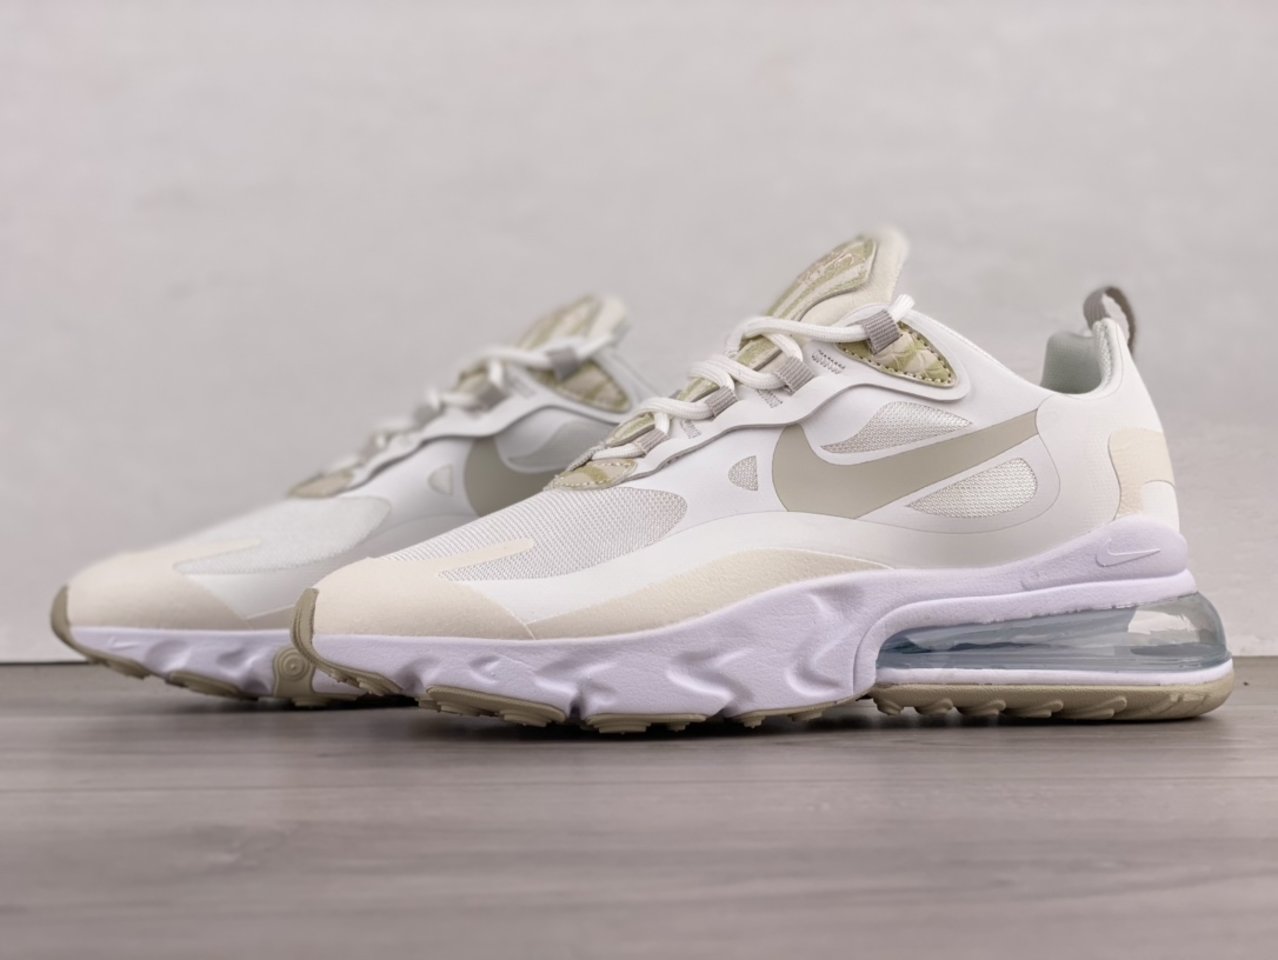 2021 Best Selling Nike Air Max 270 React Light Bone Outlet Sale CV8815-100